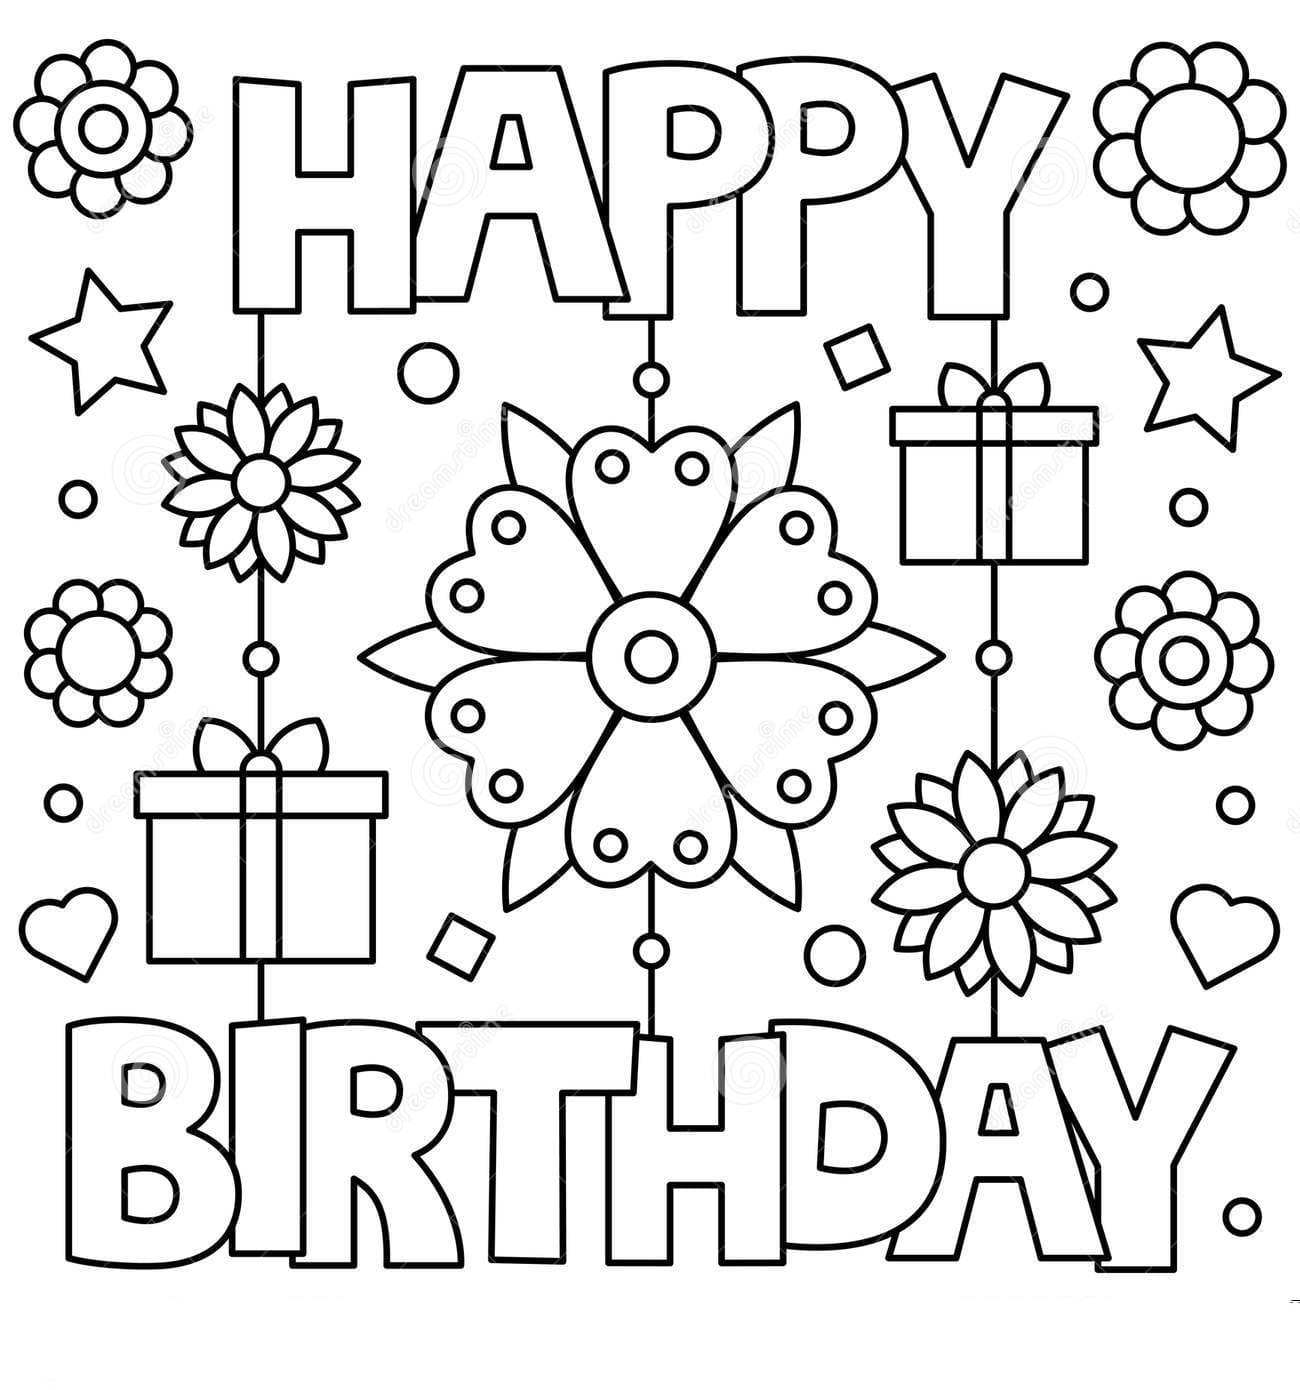 Happy Birthday Coloring Card. New collection 2020. Free Printable